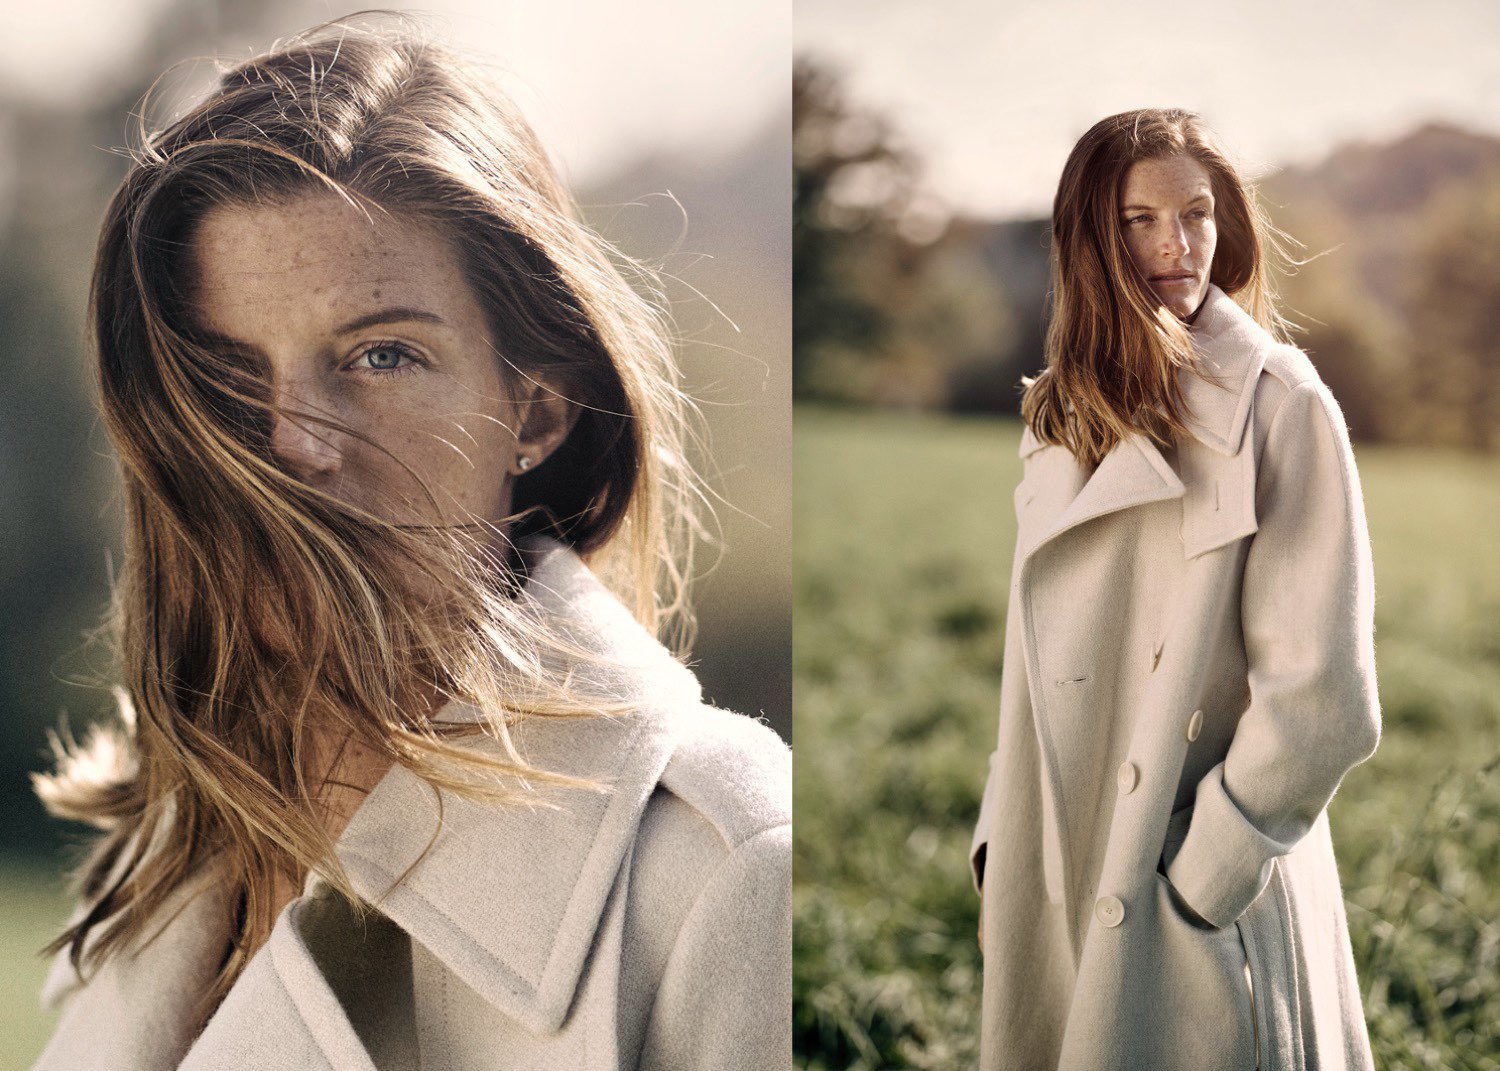 New editorial of Mimmi & Laura for the T Magazin Le Temps.